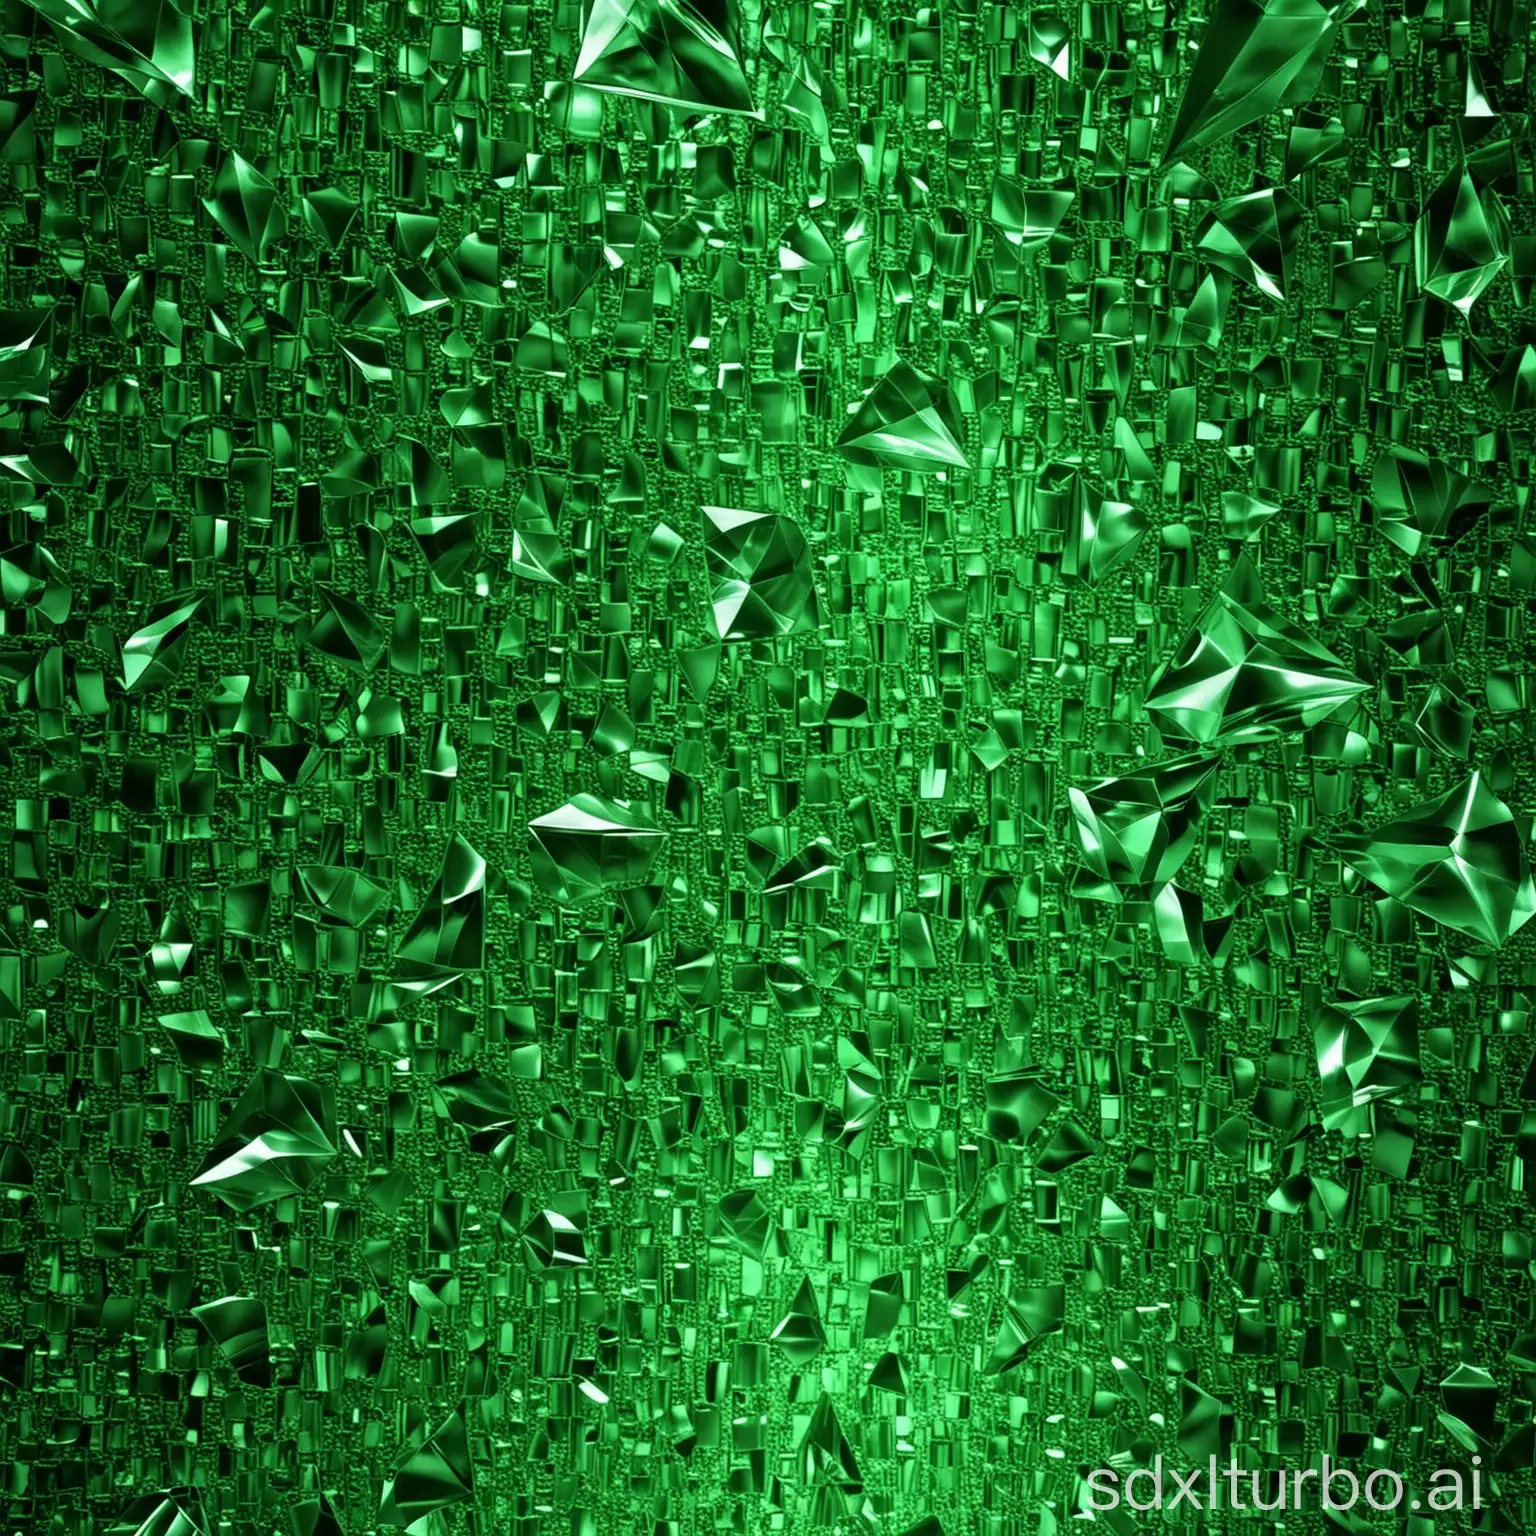 Glowing-Green-Crystal-Texture-Illuminated-in-Darkness